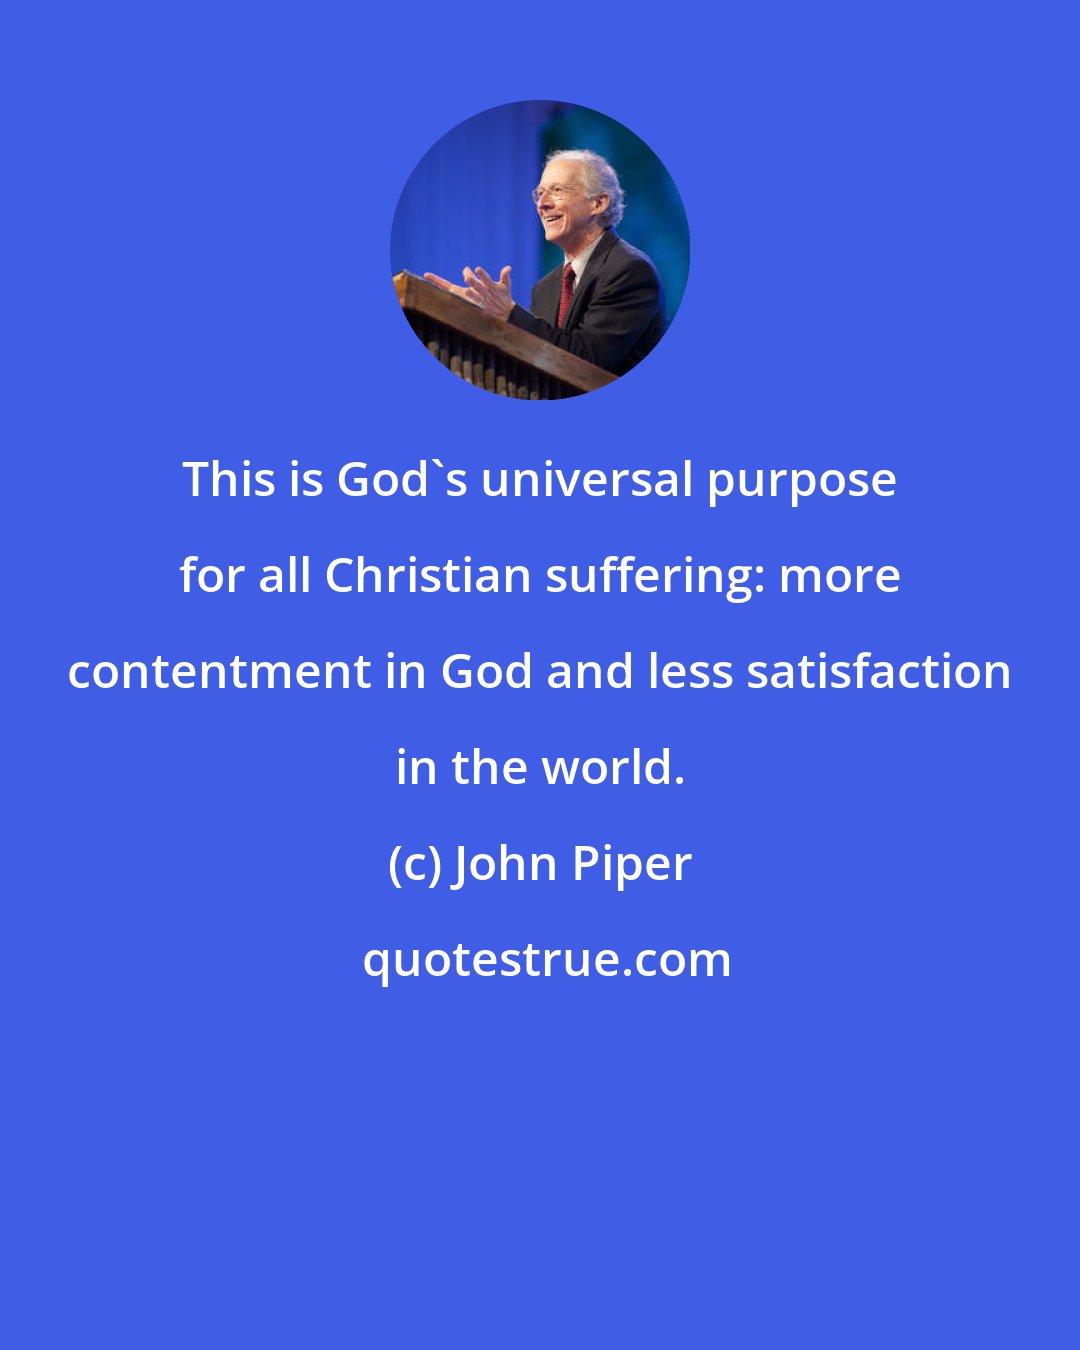 John Piper: This is God's universal purpose for all Christian suffering: more contentment in God and less satisfaction in the world.